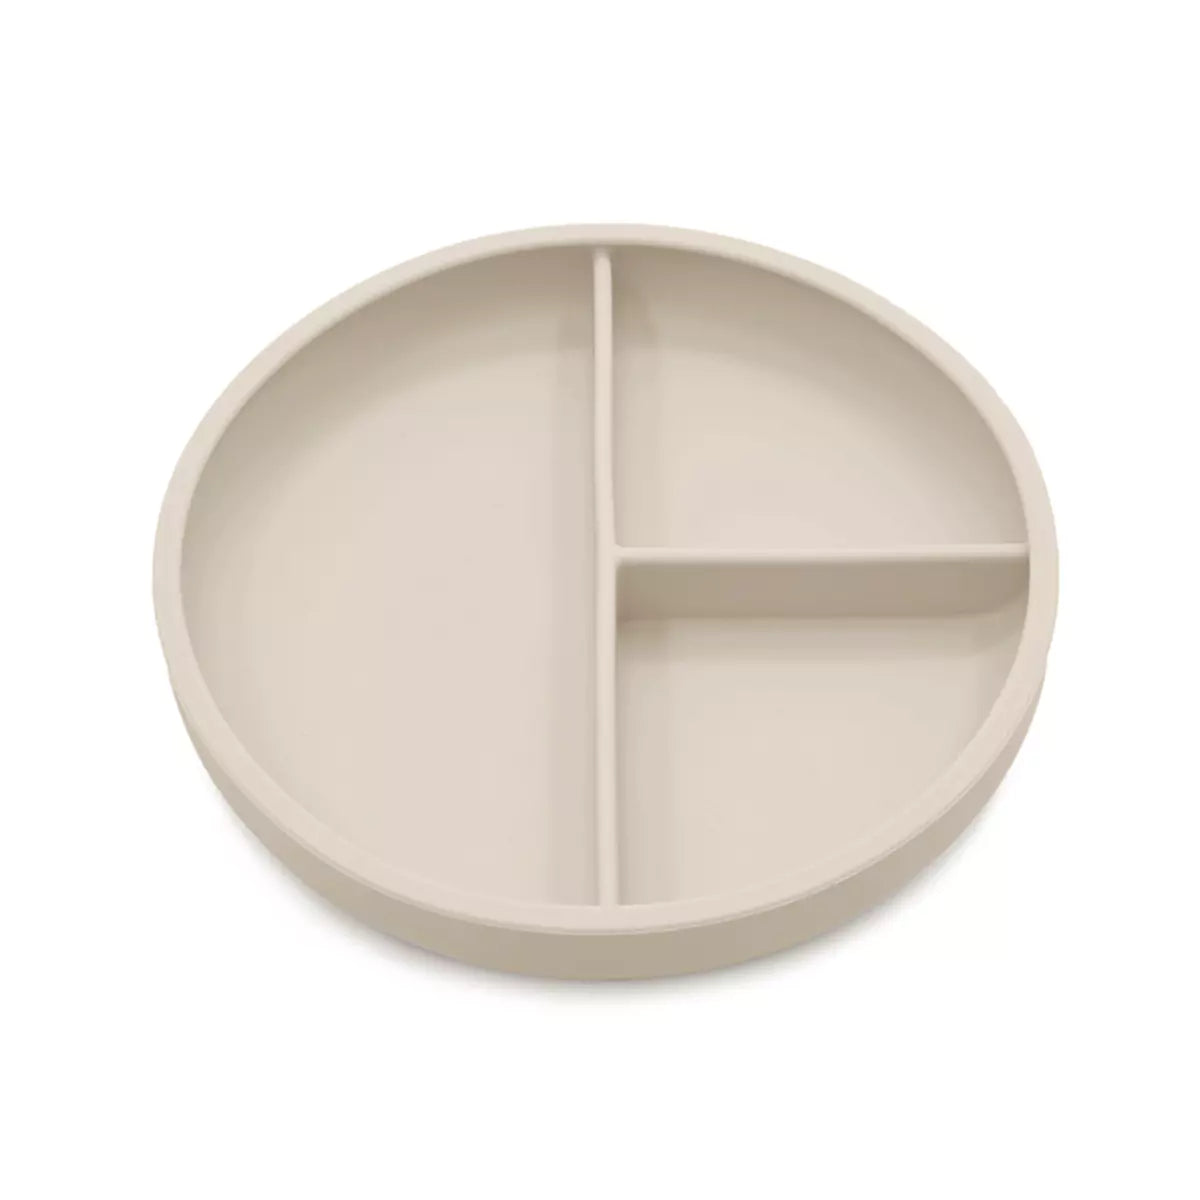 Food-Grade Silicone Suction Divider Plate - Beige